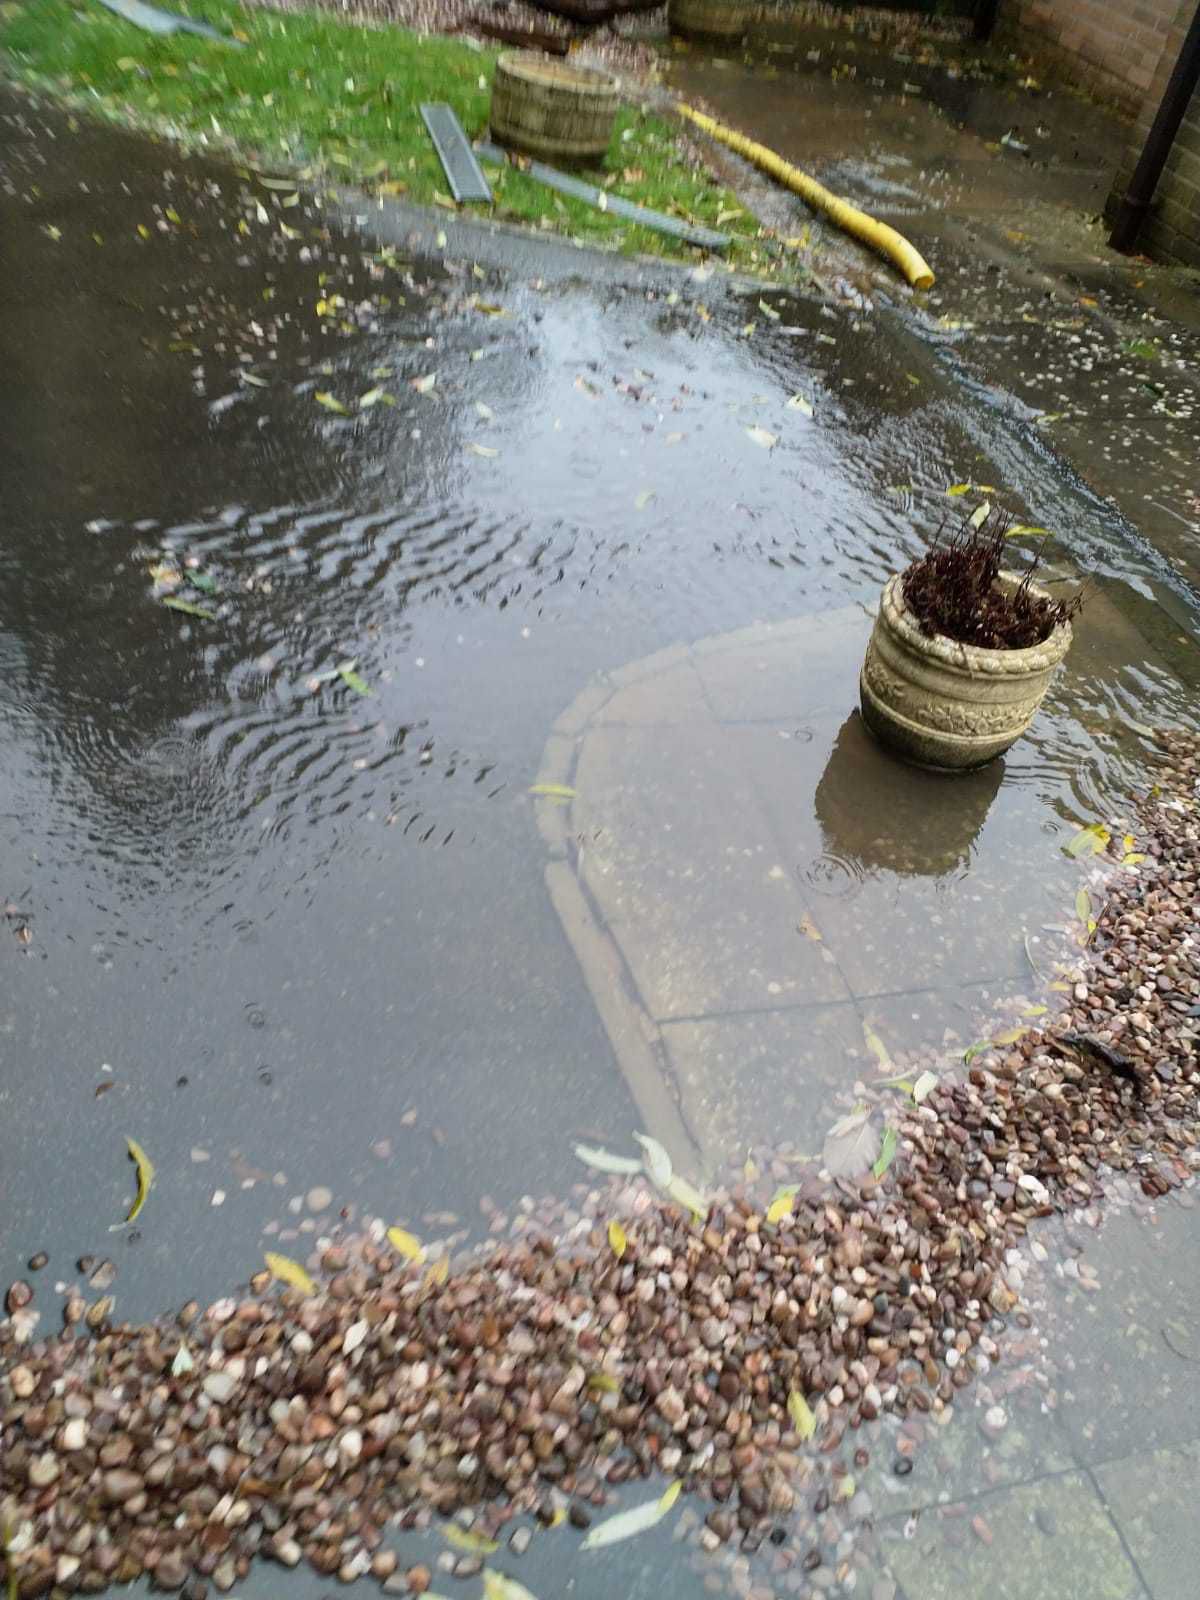 The flooding at one of the homes